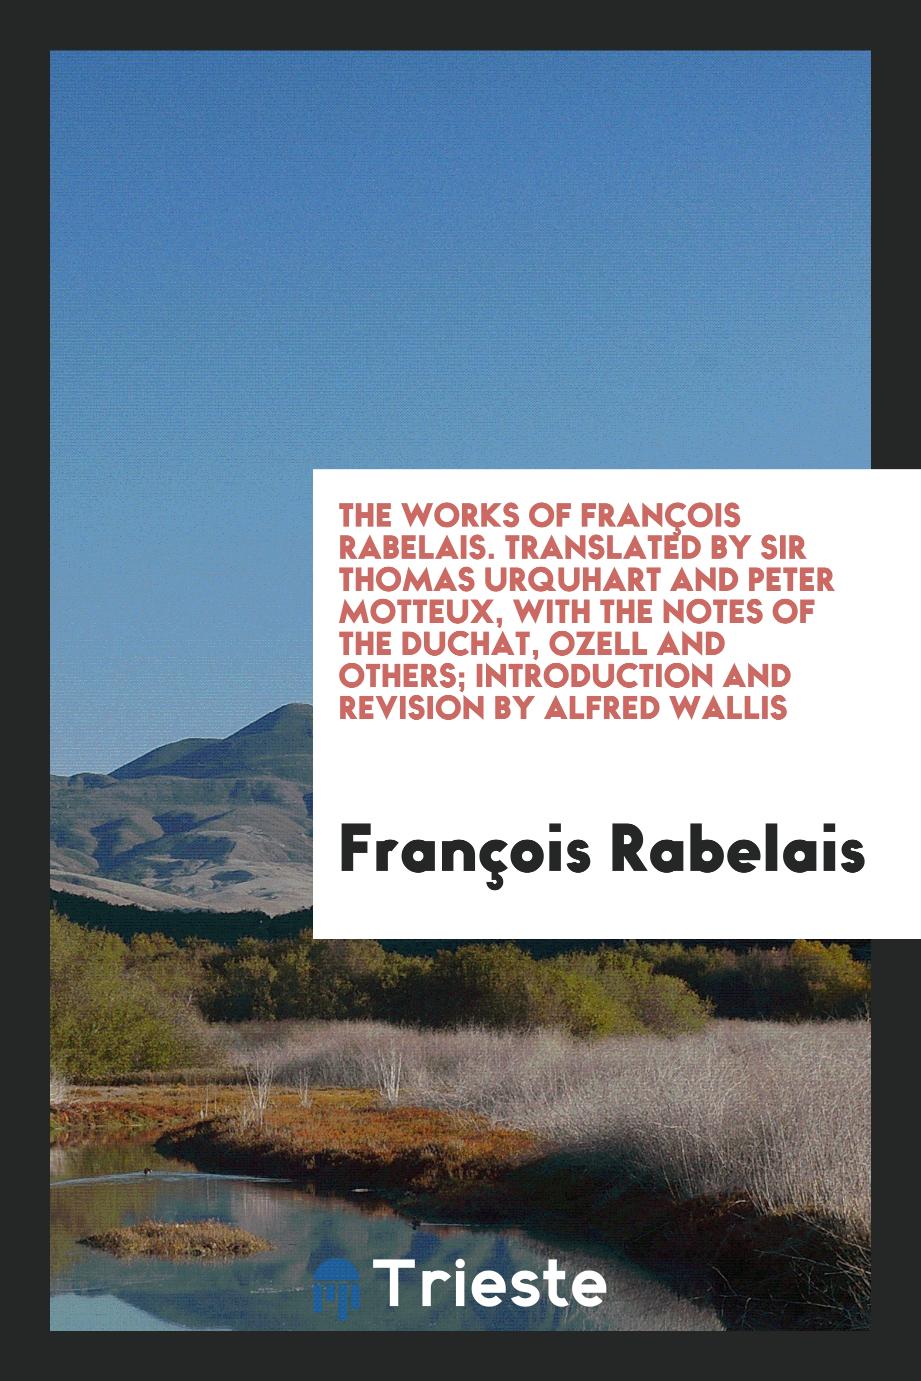 The works of François Rabelais. Translated by sir Thomas Urquhart and Peter Motteux, with the notes of the Duchat, Ozell and others; introduction and revision by Alfred Wallis